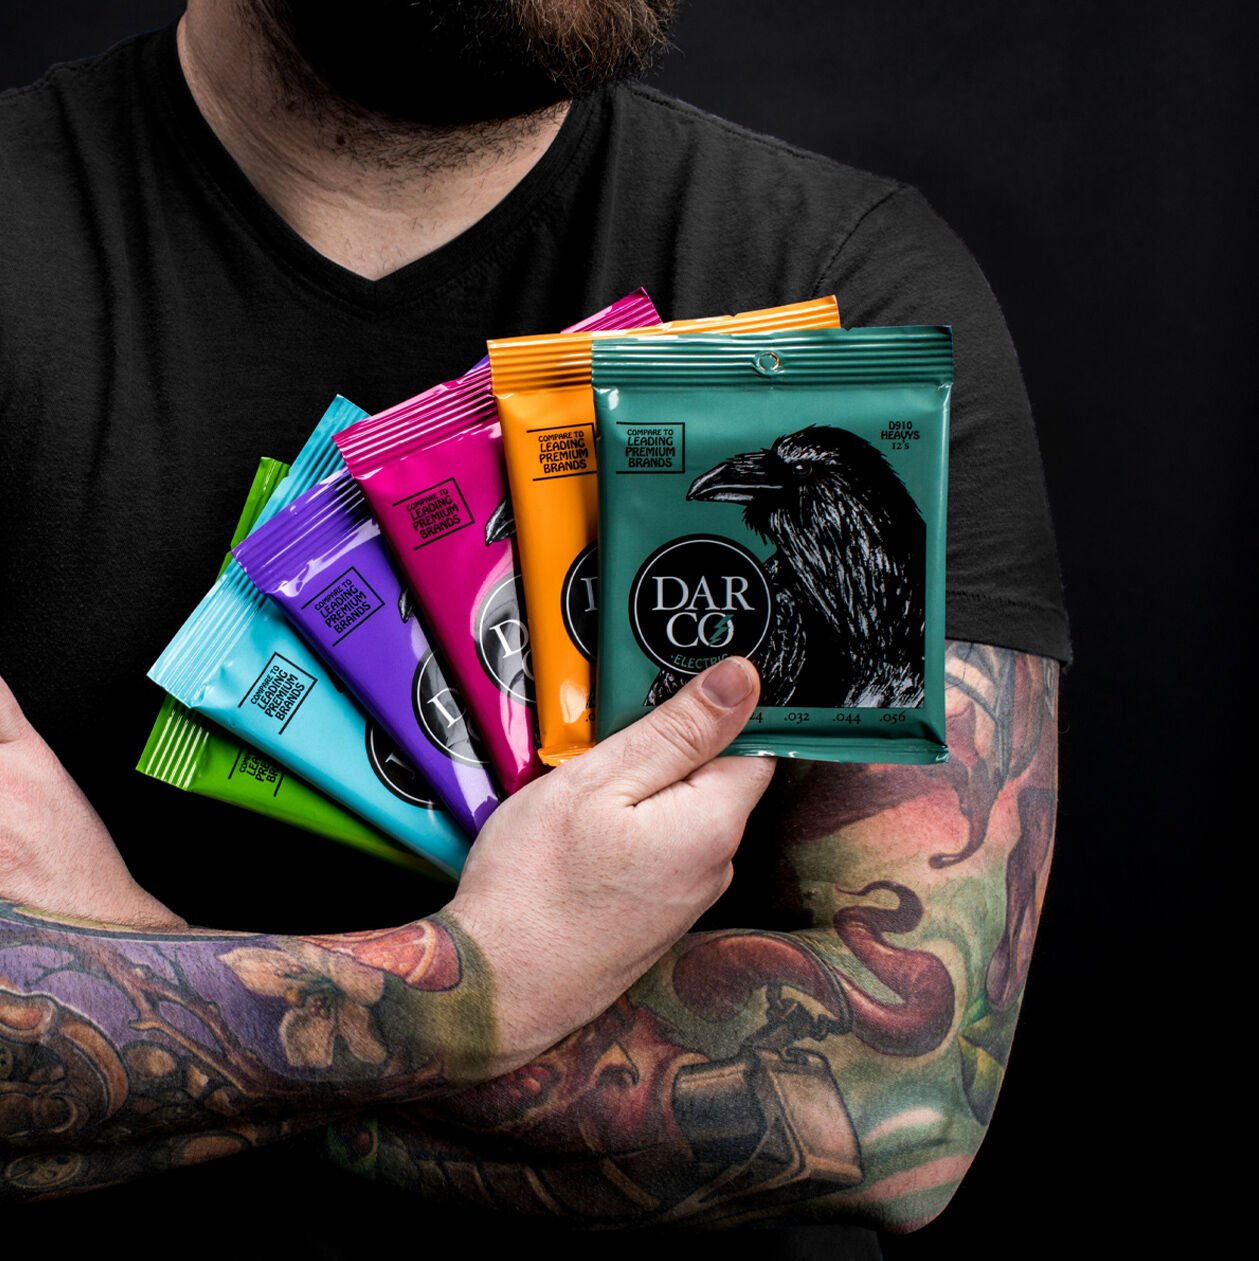 Person holding colorful packs of guitar strings